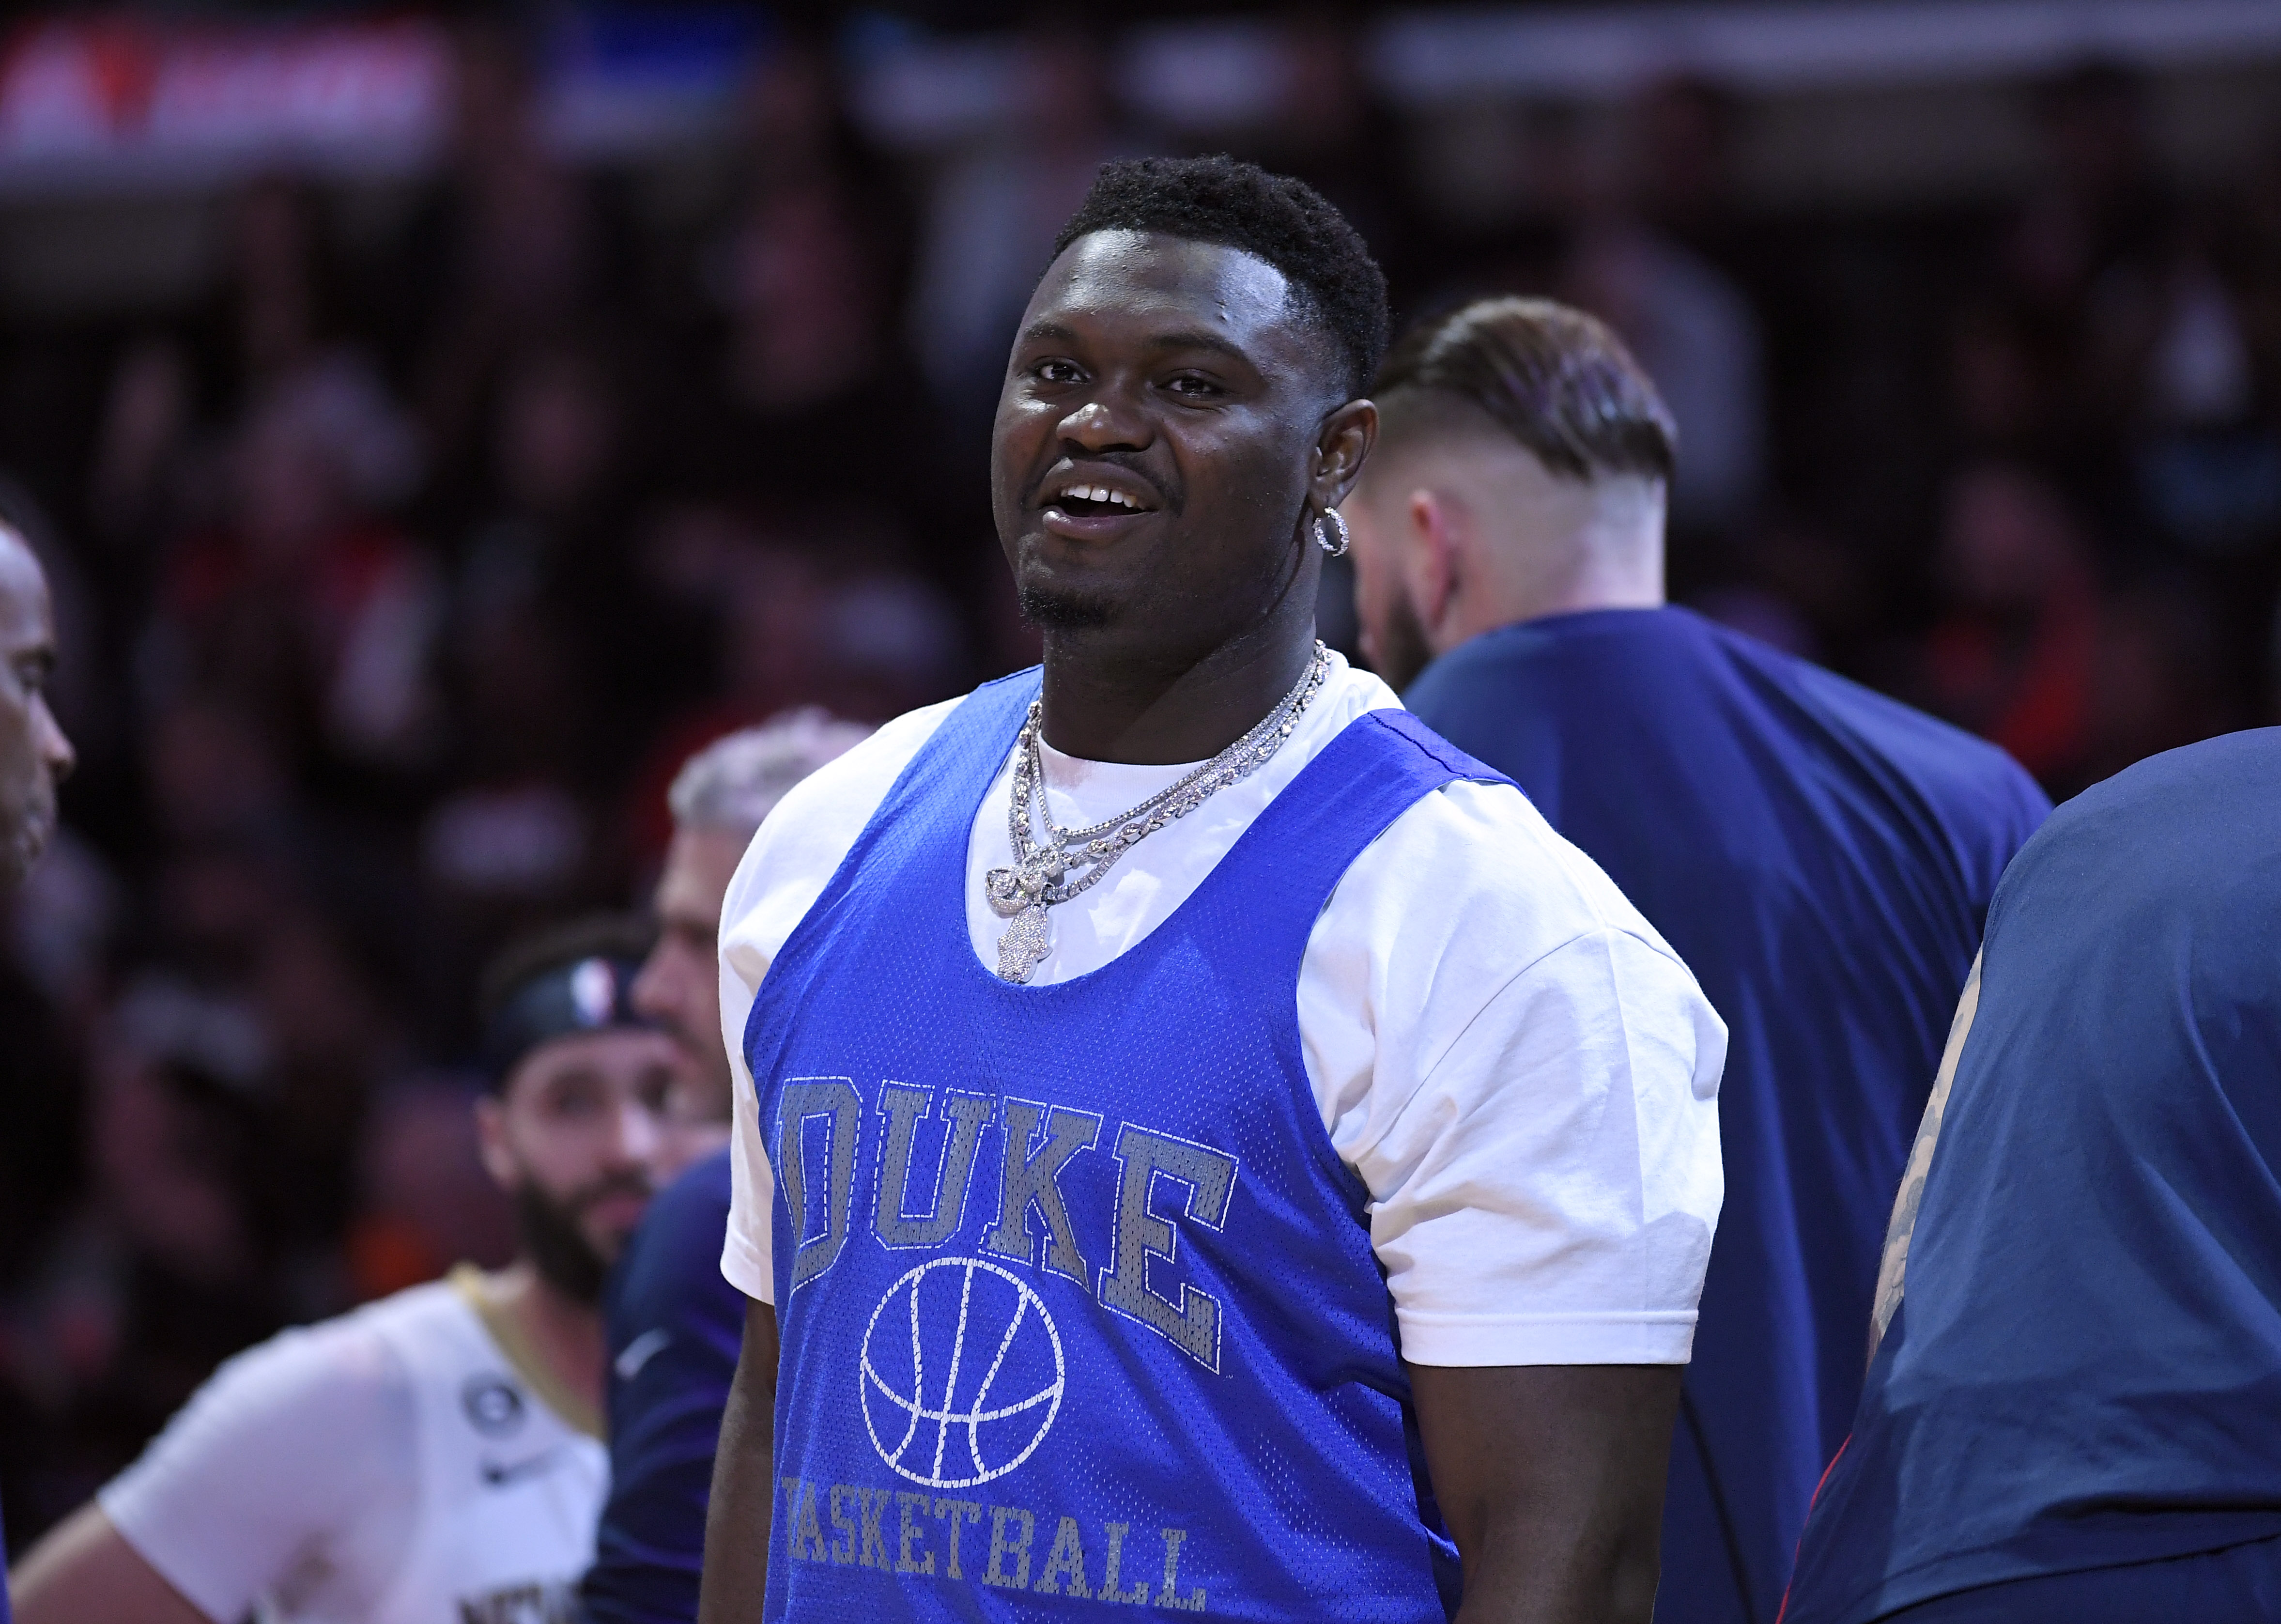 Zion Williamson at Crypto.com Arena on March 25, 2023, in Los Angeles, California. | Source: Getty Images